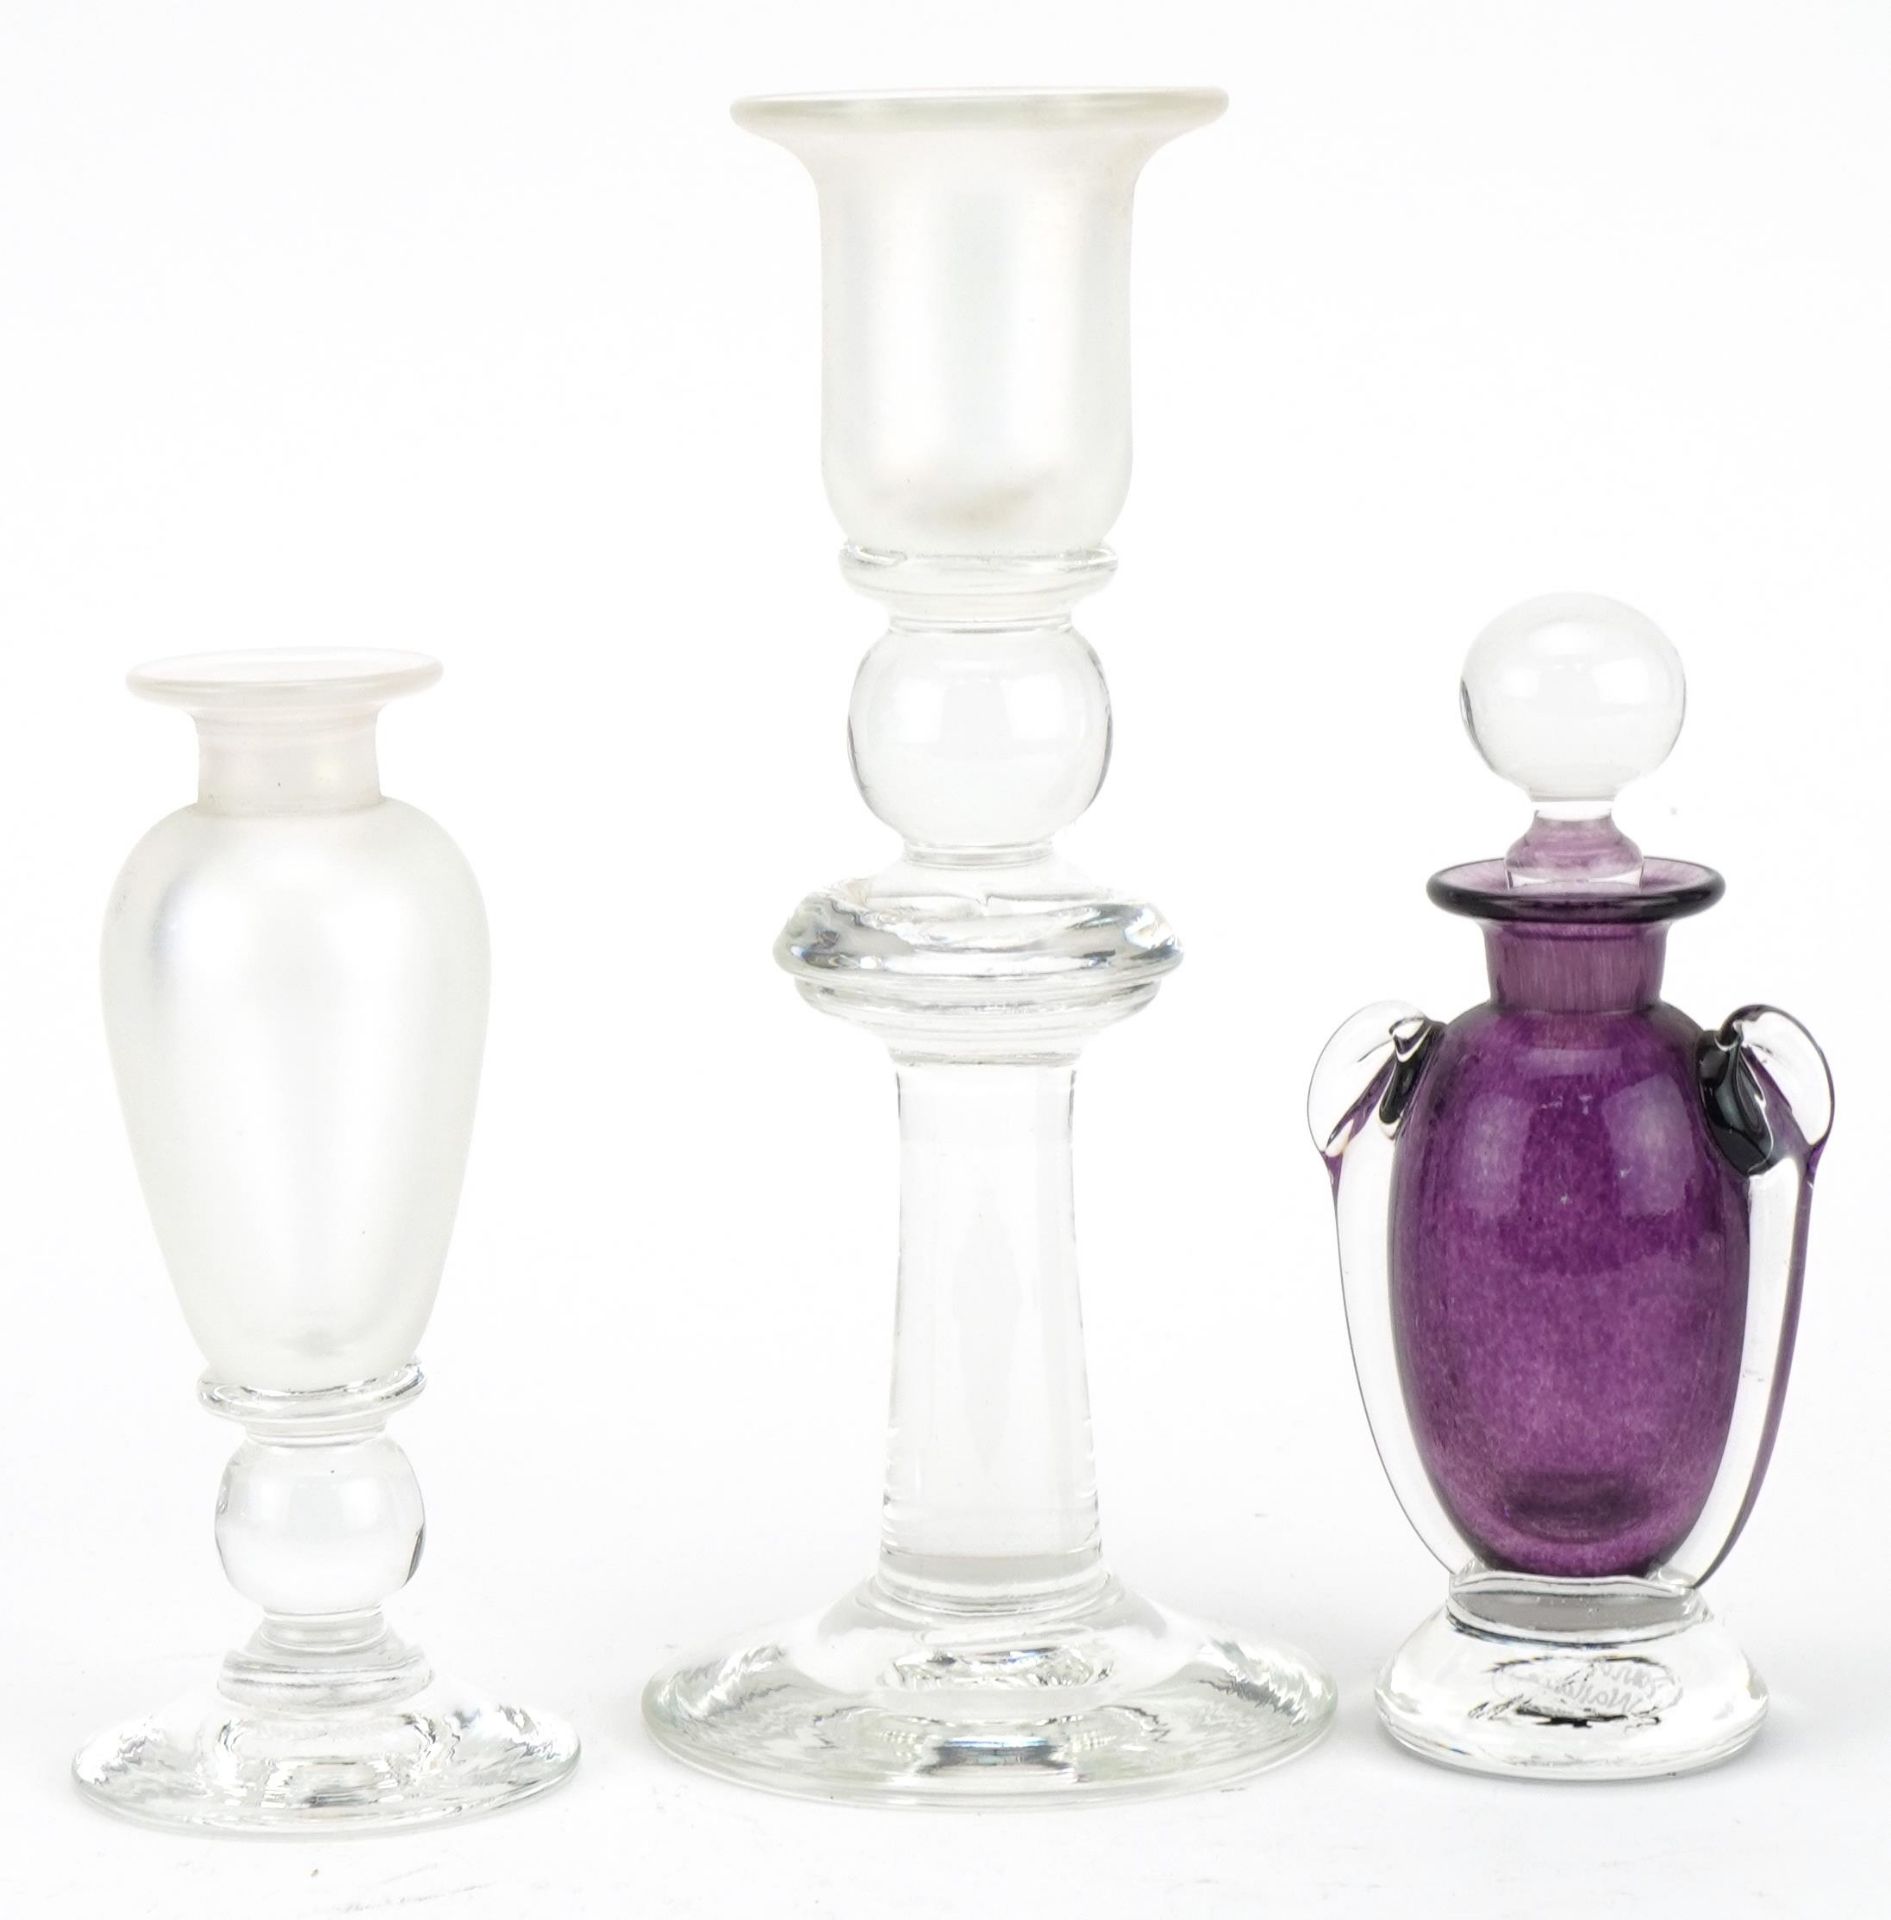 David Wallace Art glassware including a purple scent bottle with handles and stopper and - Image 2 of 4